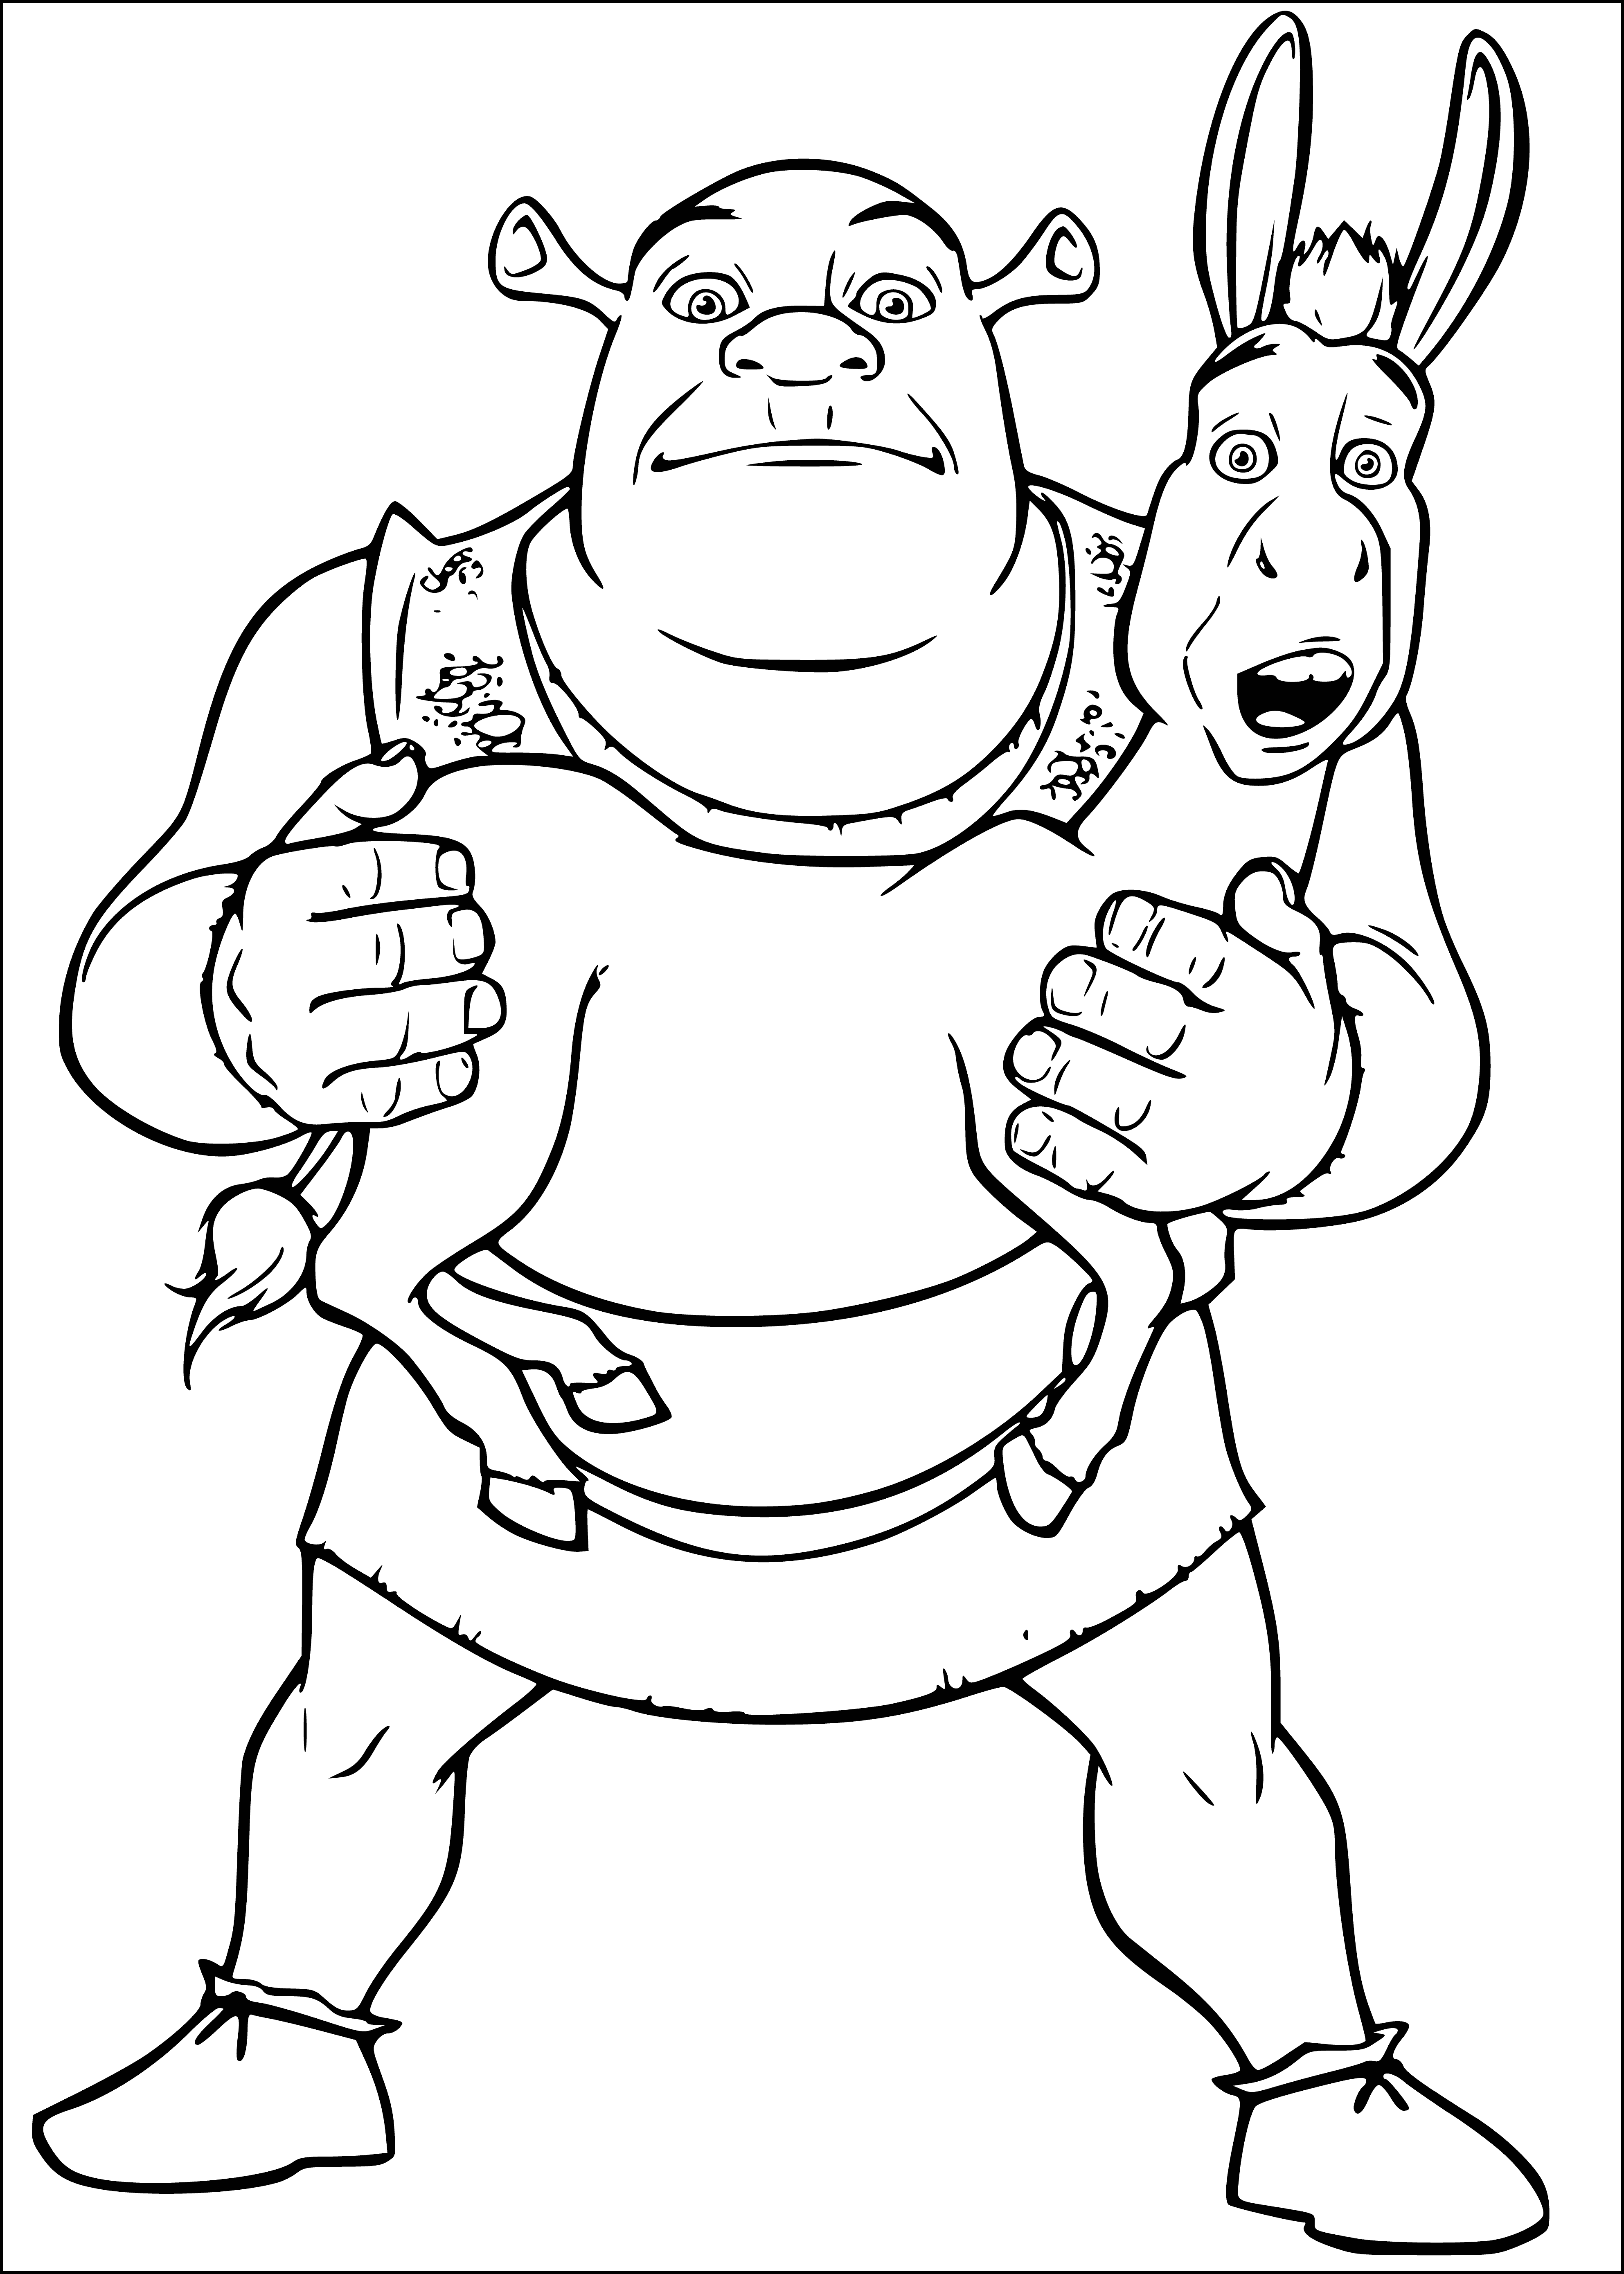 coloring page: Shrek is a large green ogre with yellow eyes and sharp teeth. Donkey is a small brown donkey with large ears and a tail in a blue cape.